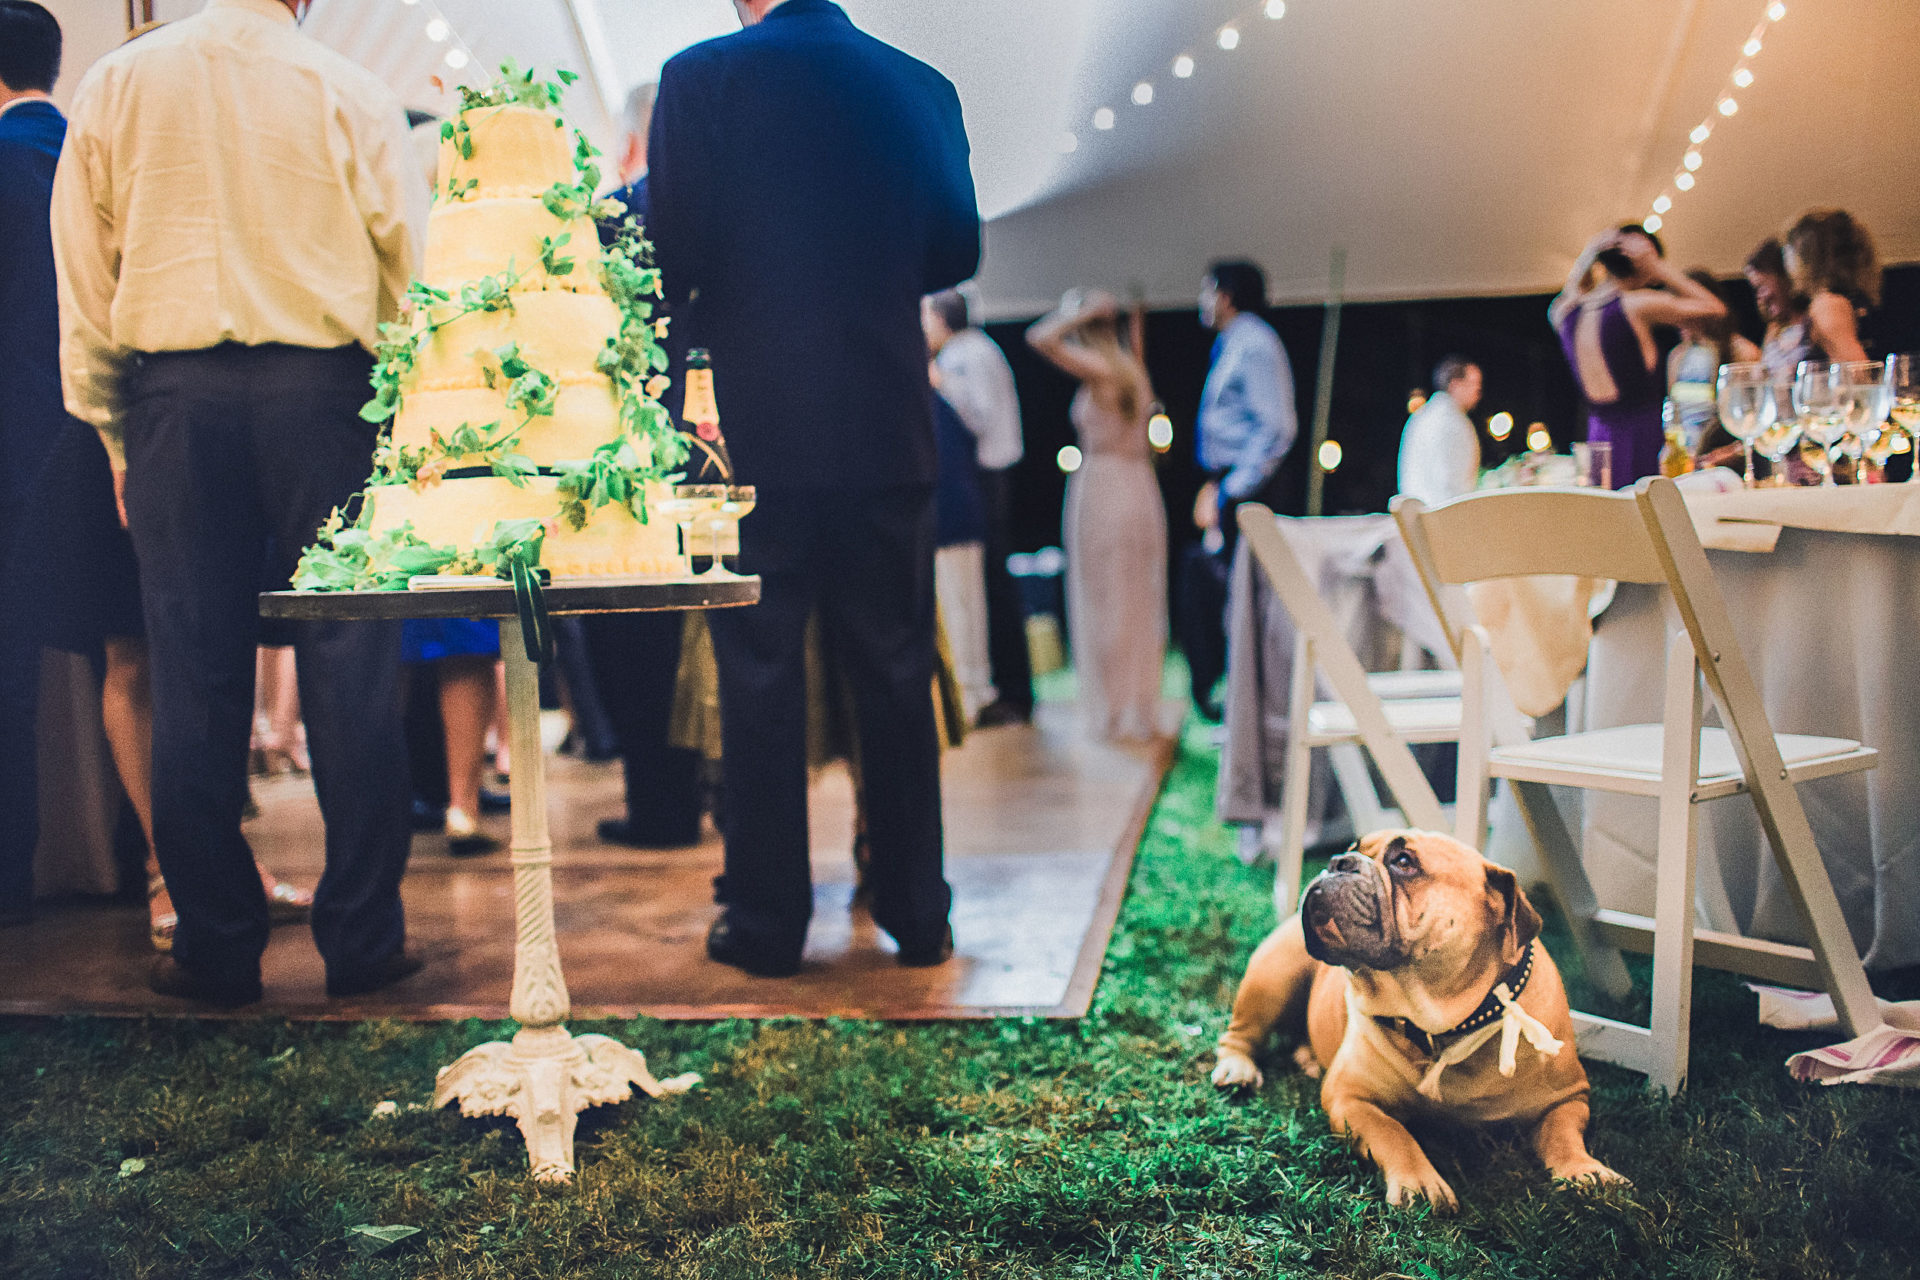 a dog looks up longingly at a tiered wedding cake in a reception tent